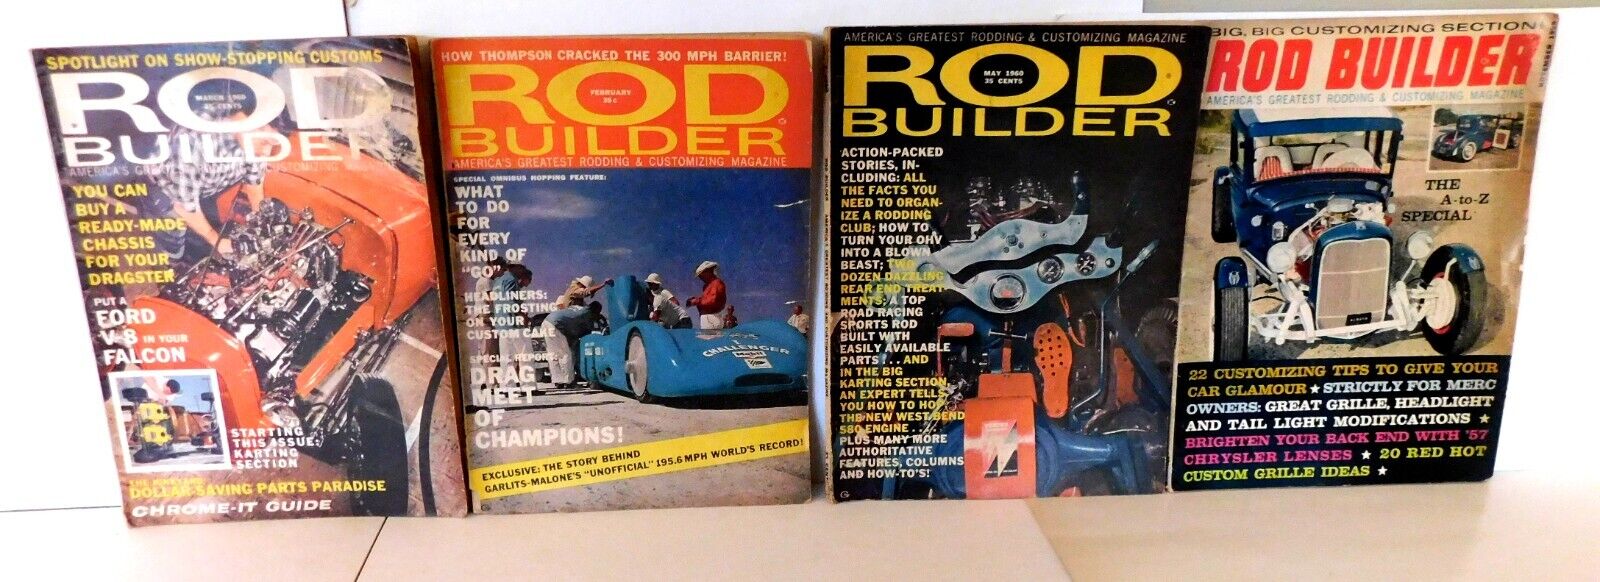 Four 1959 1960 Rod Builder Magazines in Good Used Condition